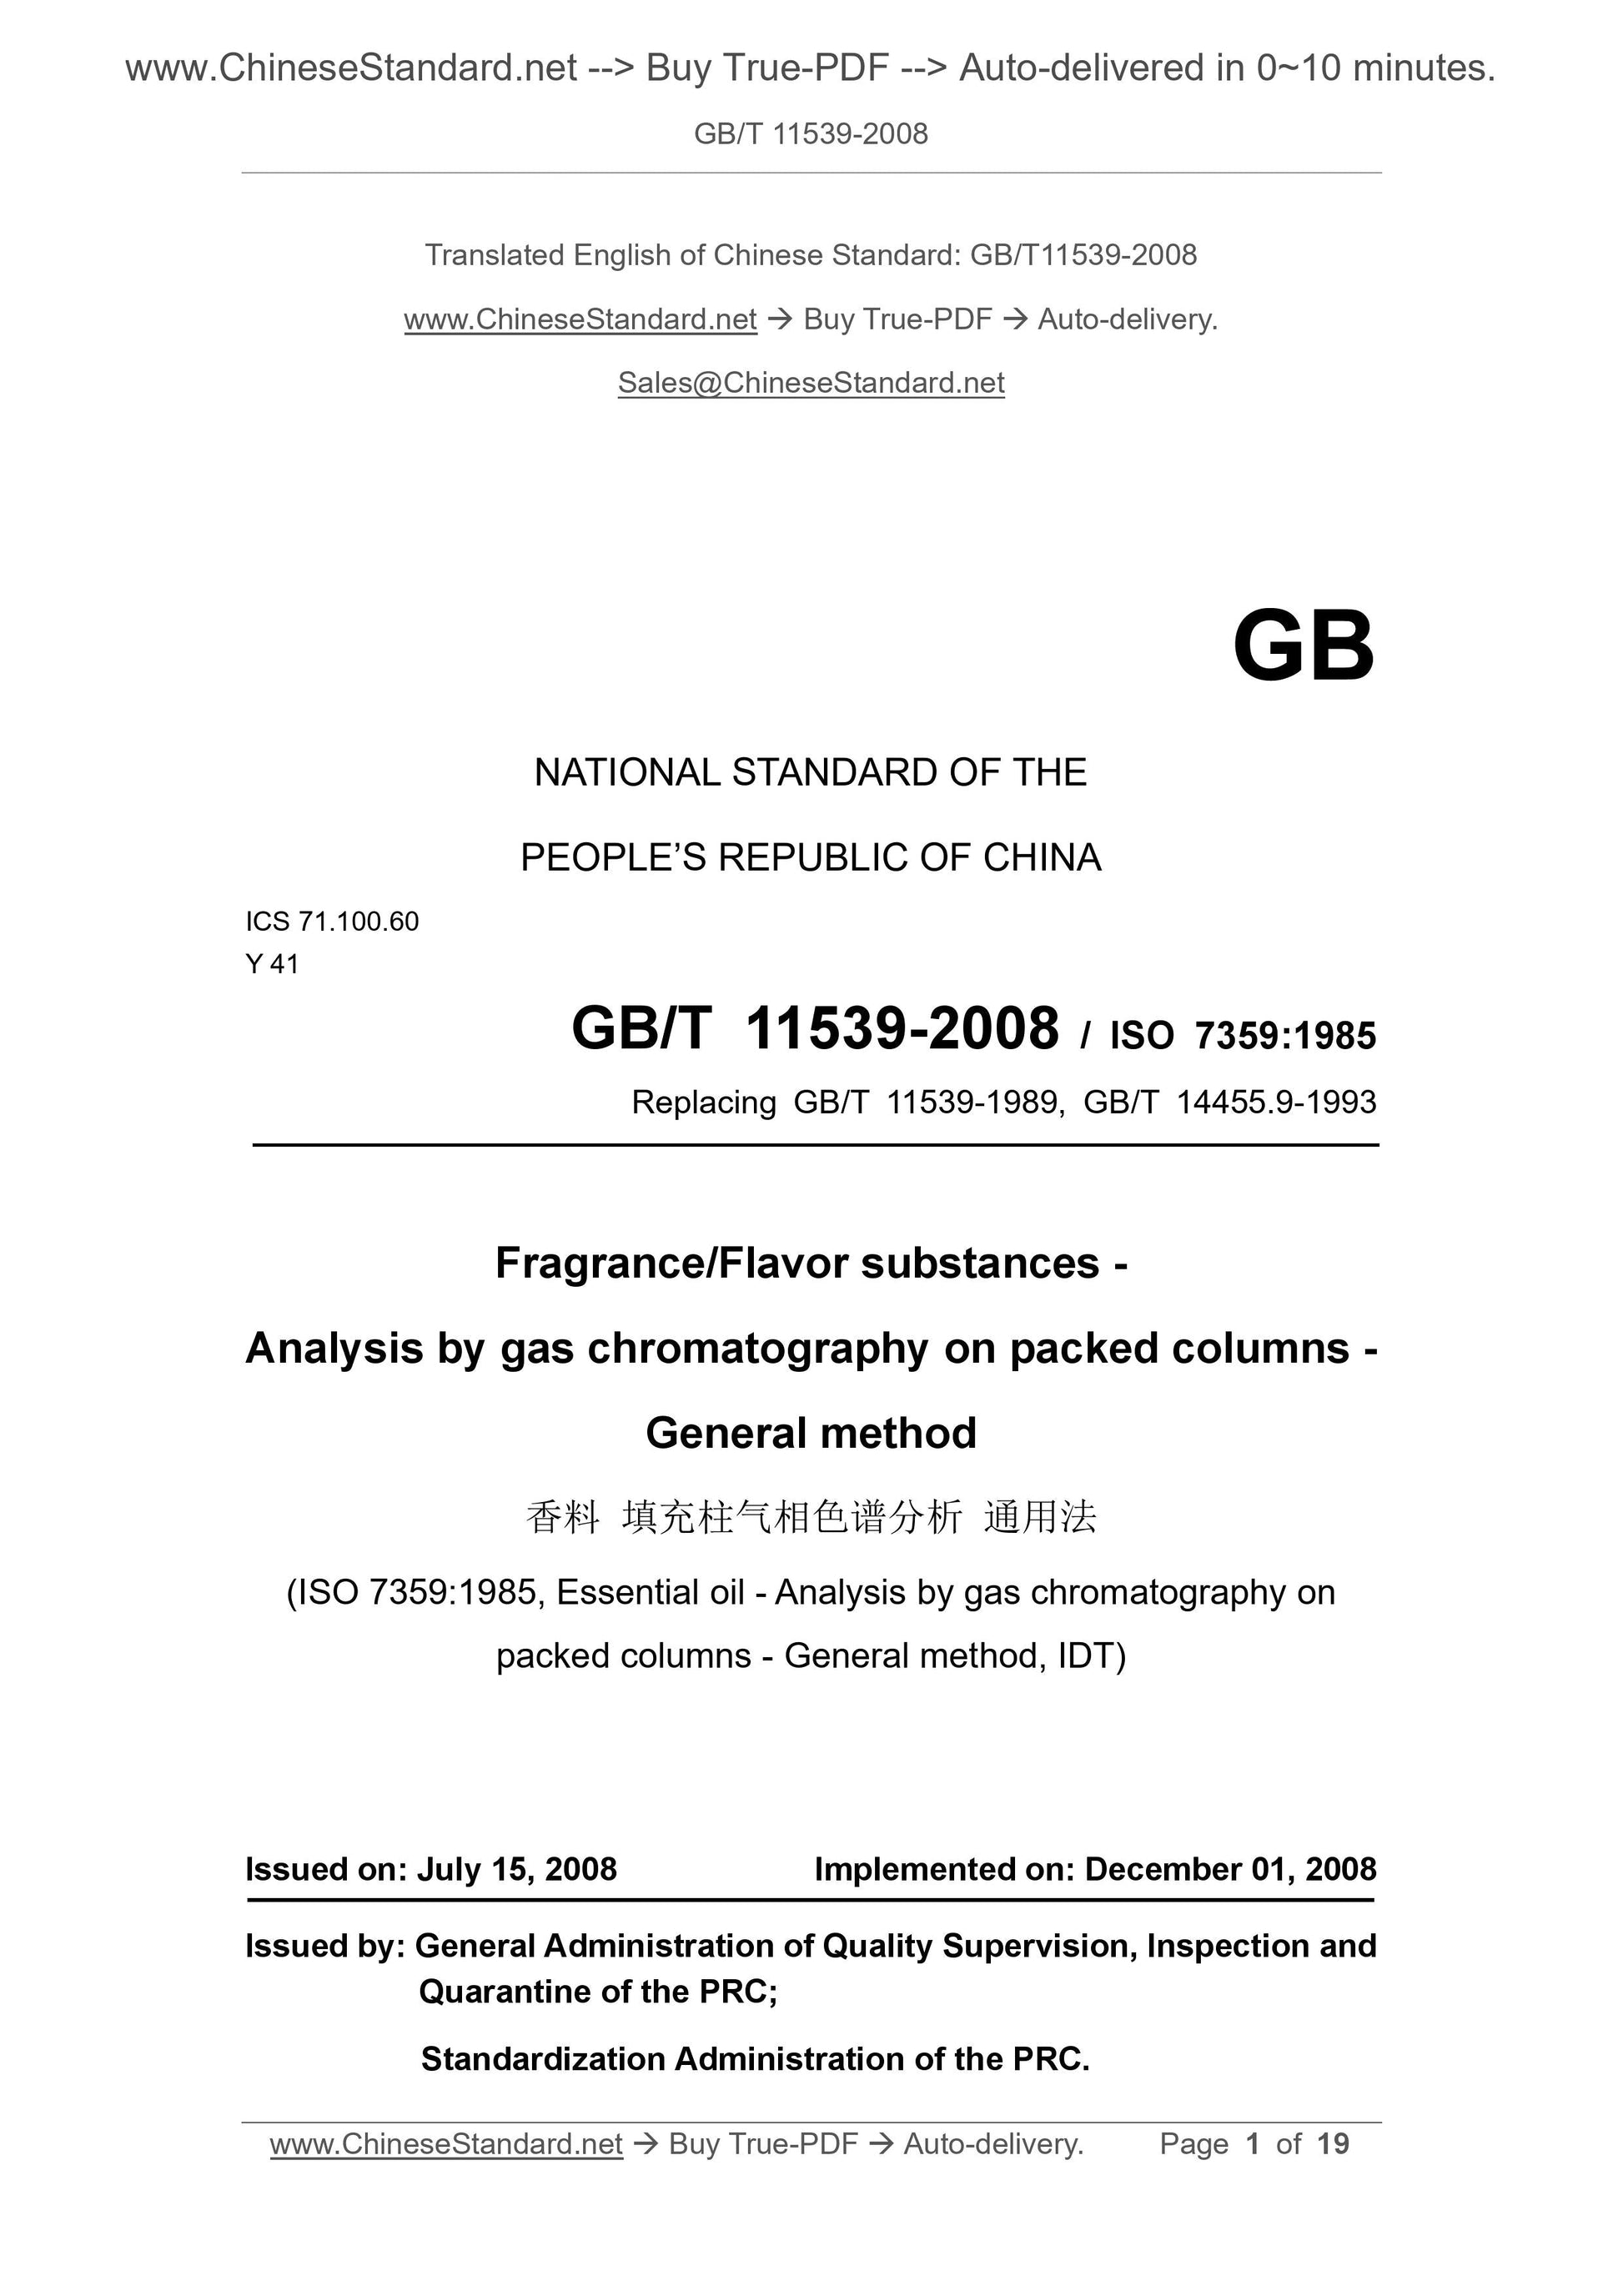 GB/T 11539-2008 Page 1